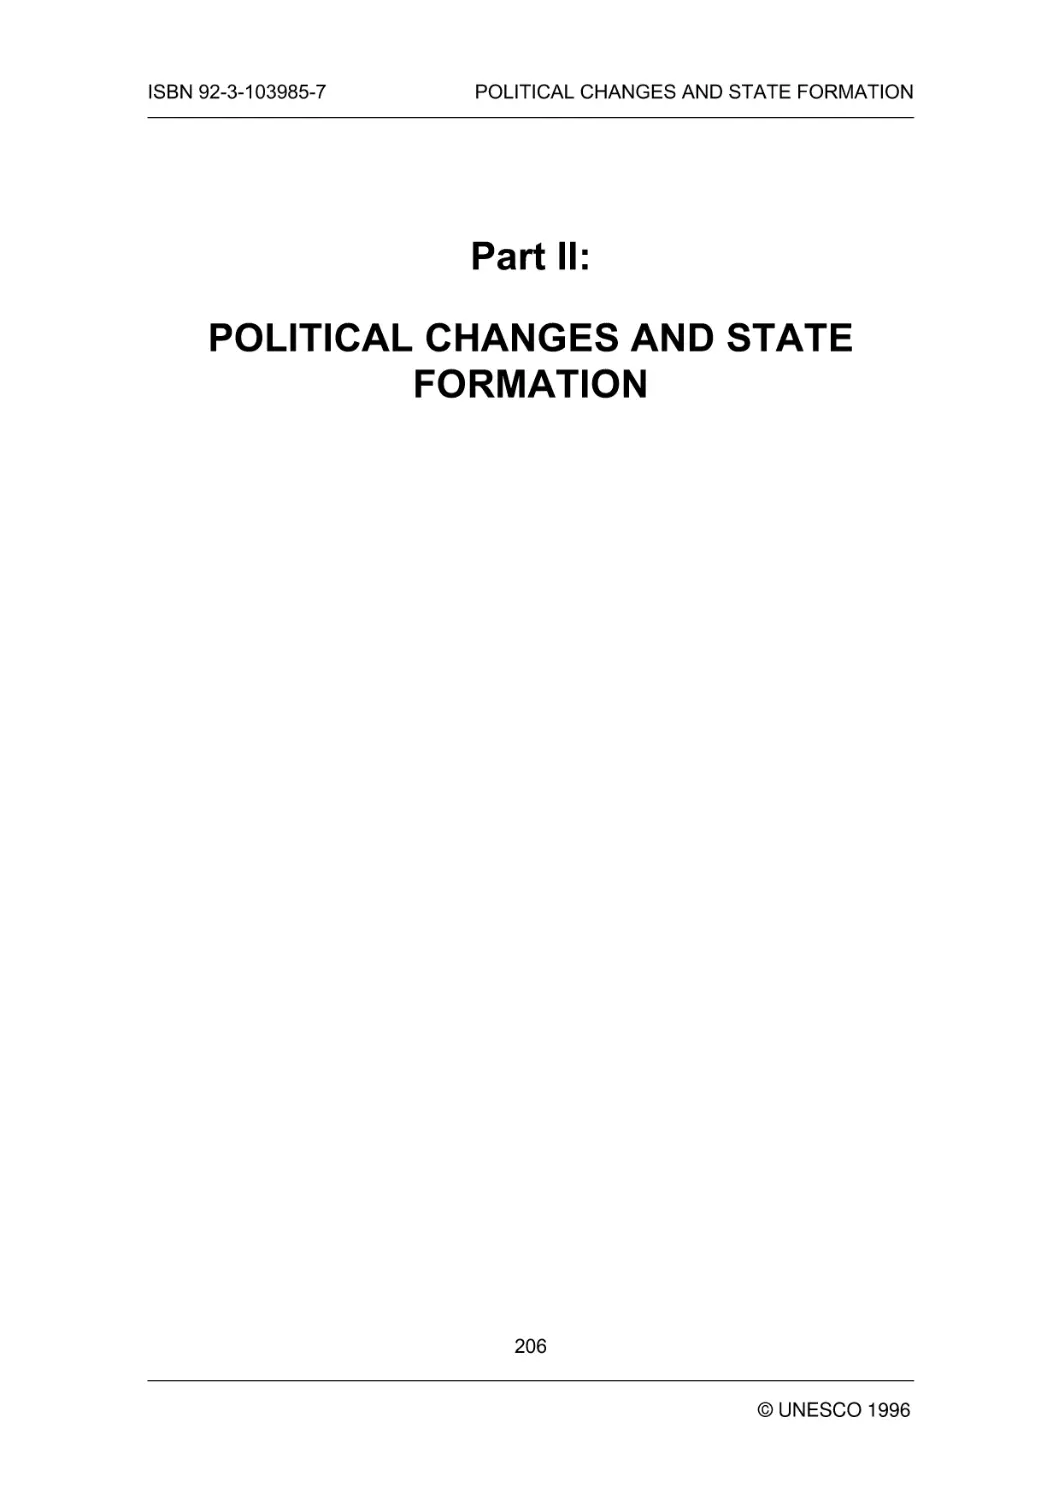 POLITICAL CHANGES AND STATE FORMATION